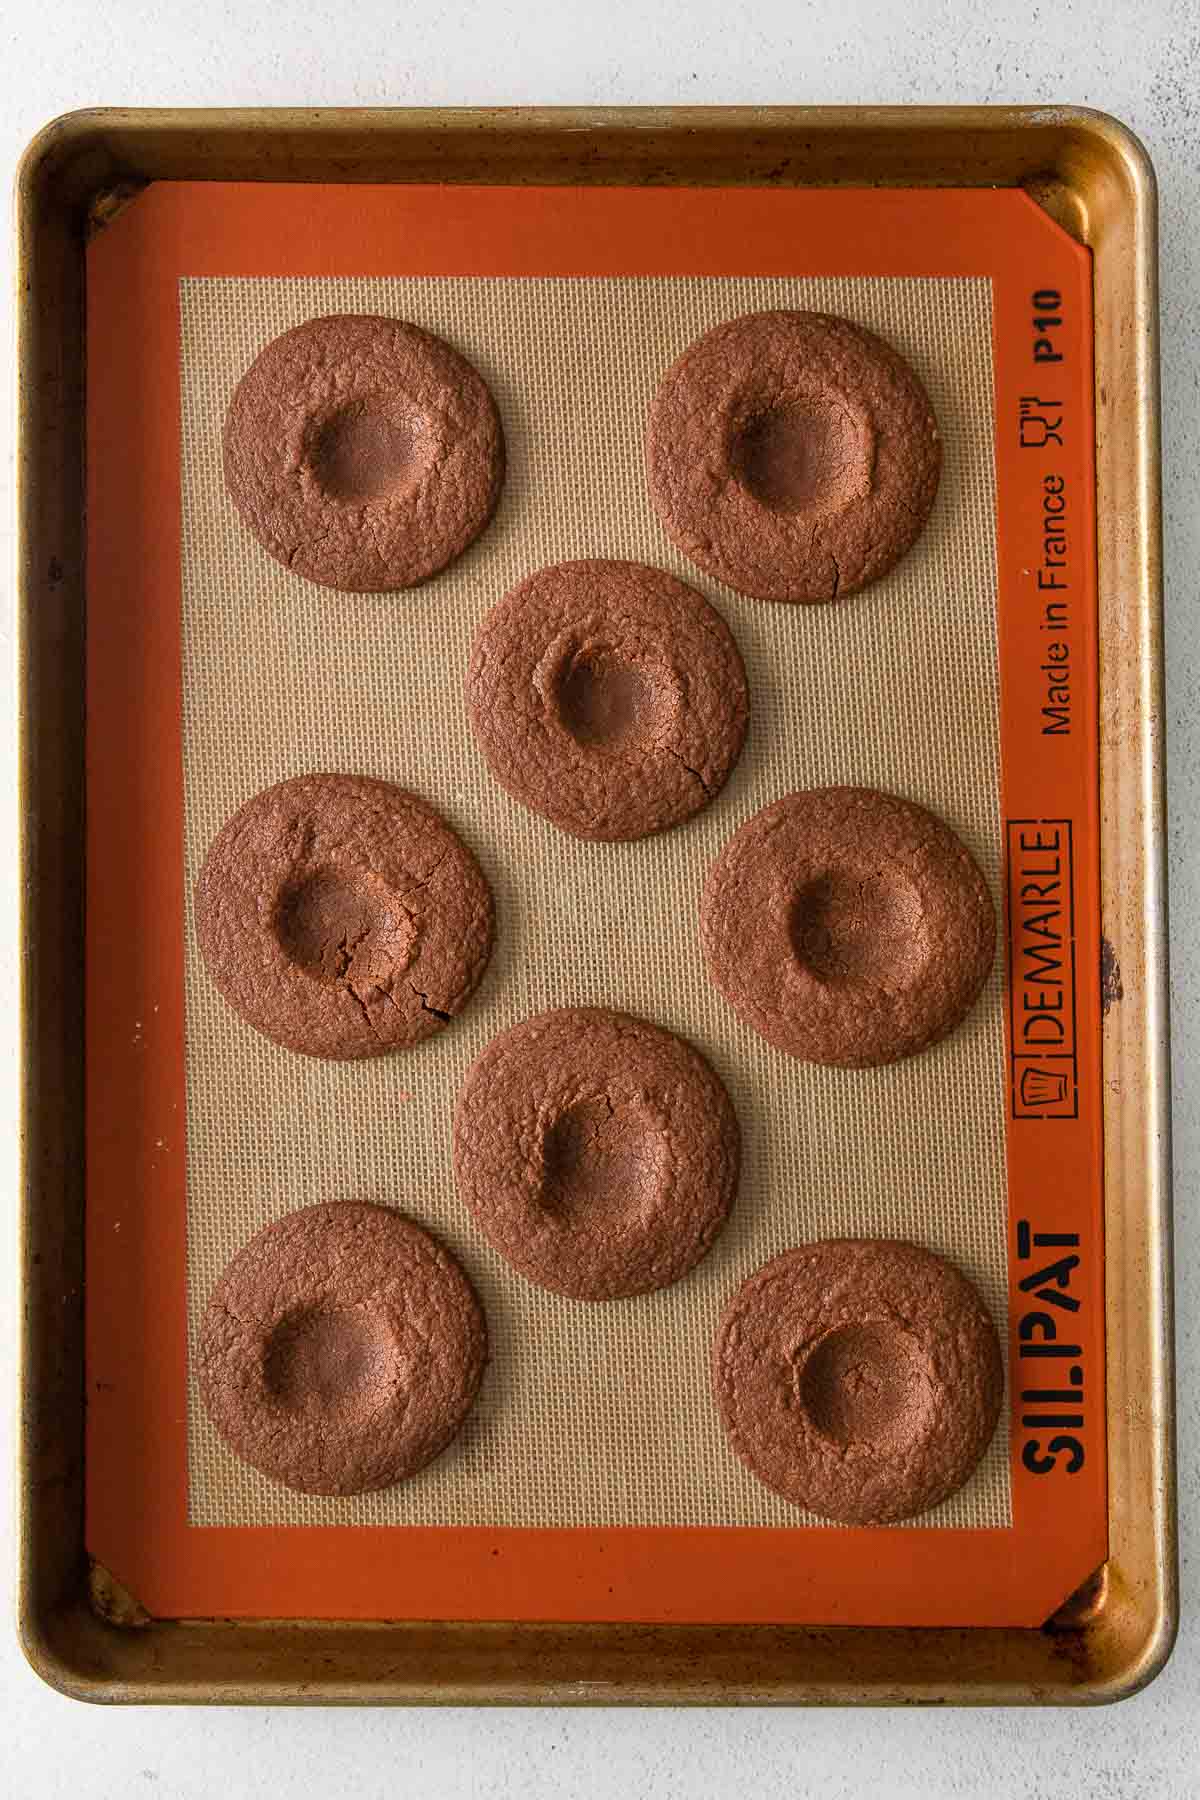 eight chocolate cookies with a pressed thumbprint in the center of each.